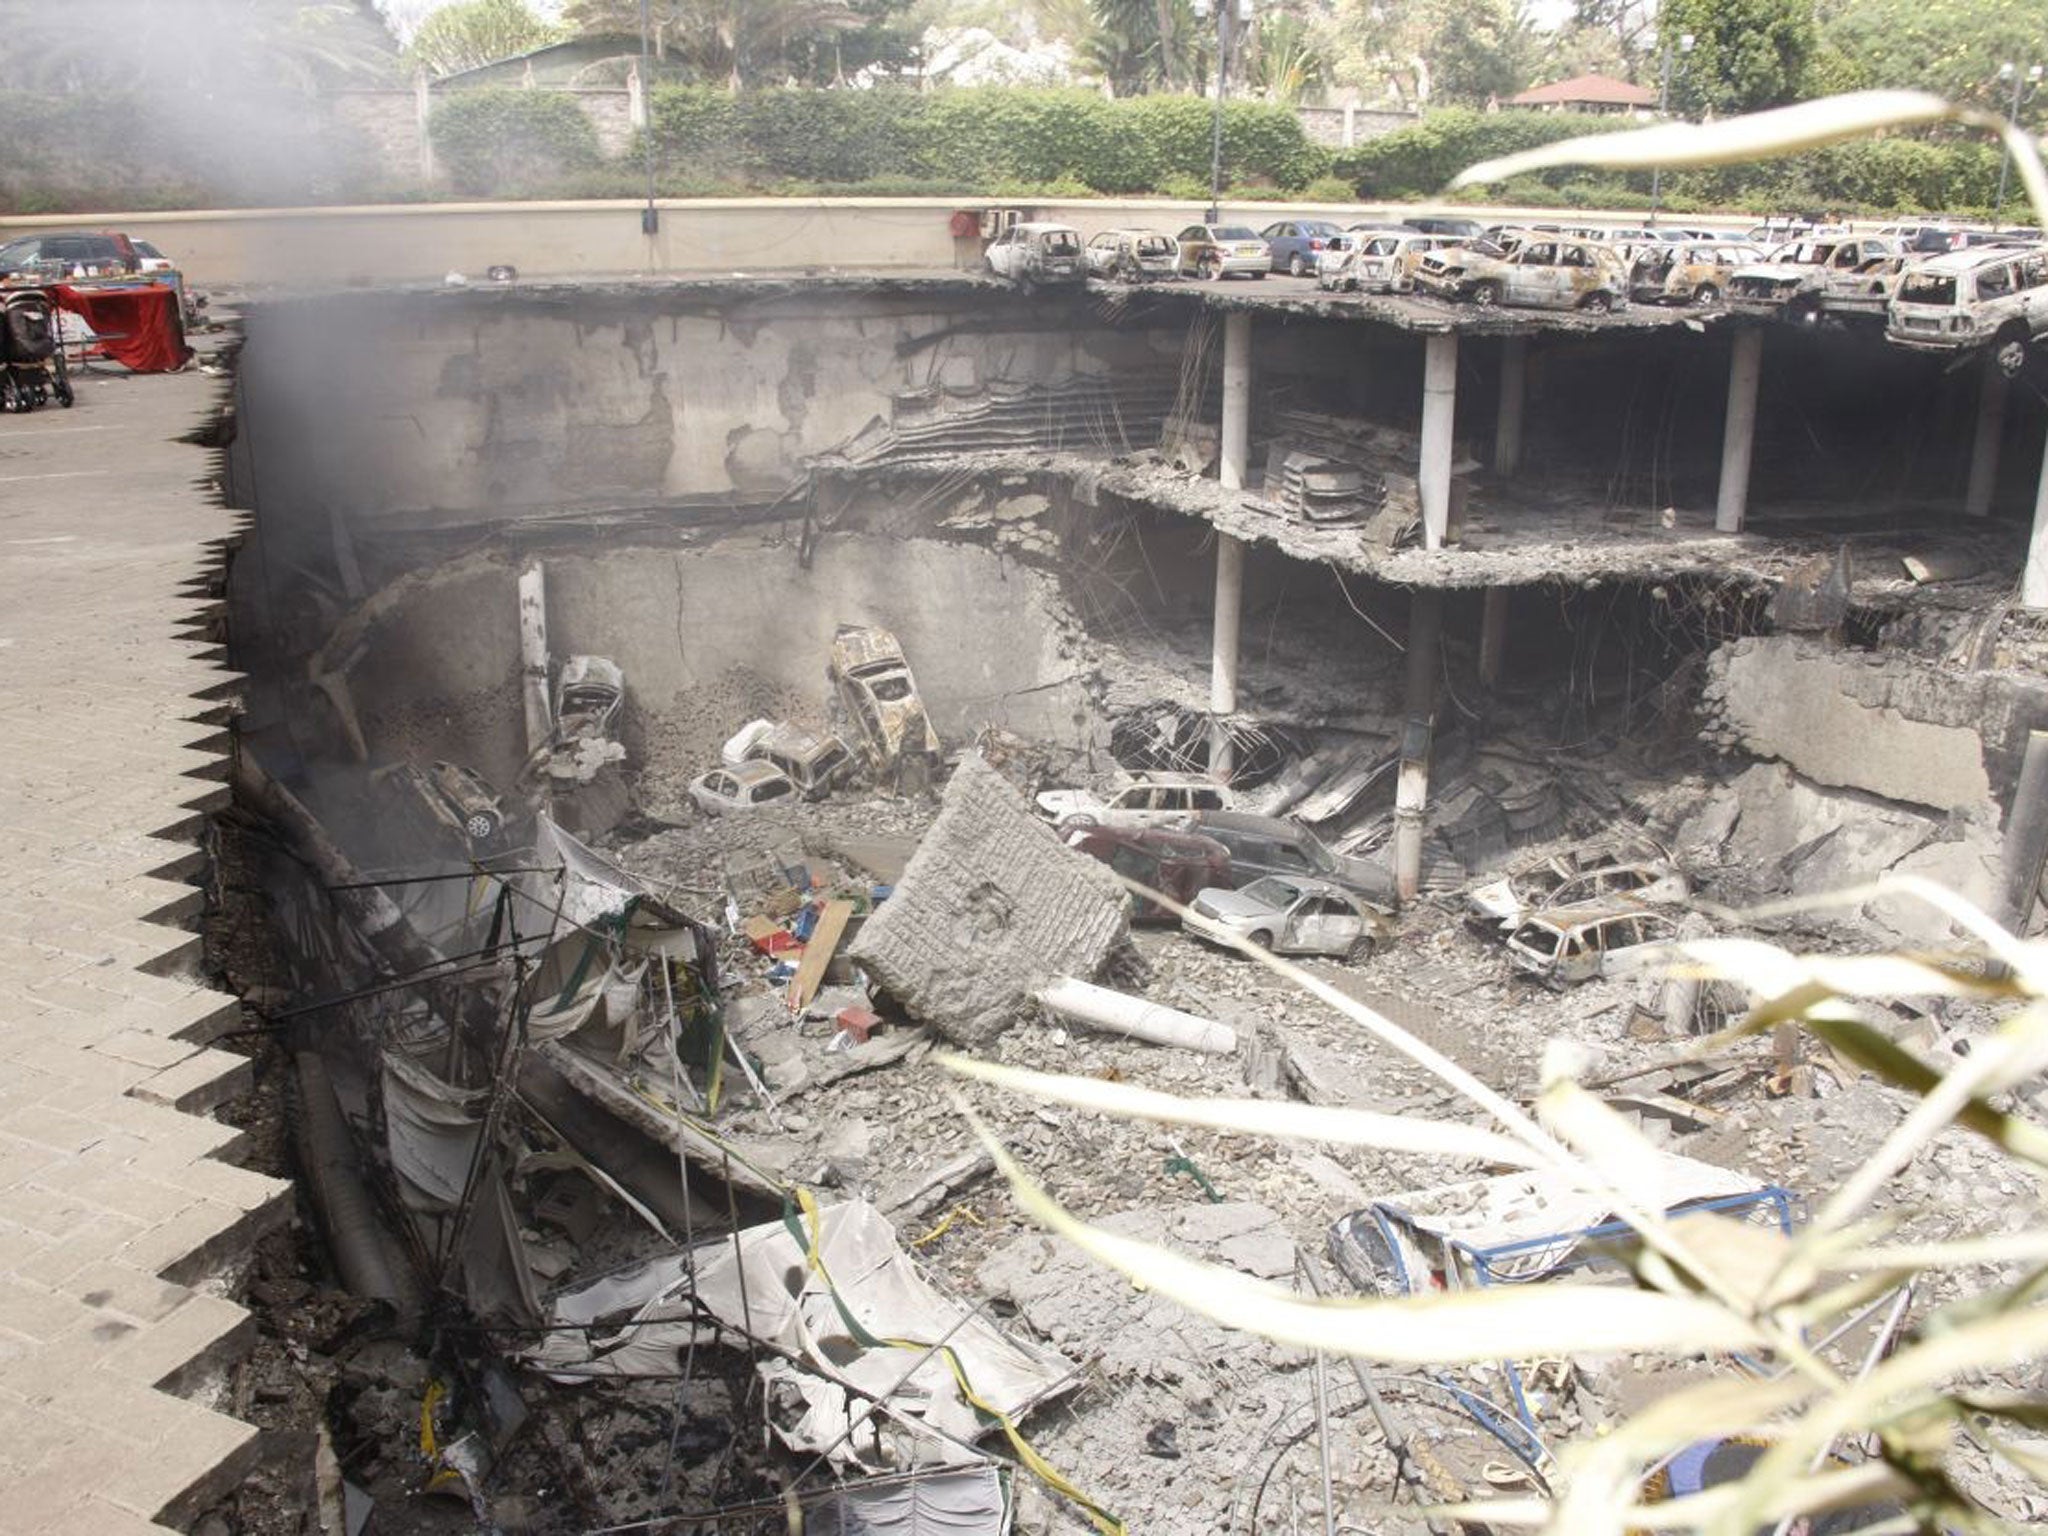 Photo released by the Kenyan Presidential office, showing the remains of cars and other debris photographed from the rooftop of the car park outside the Westgate Mall on 26 September